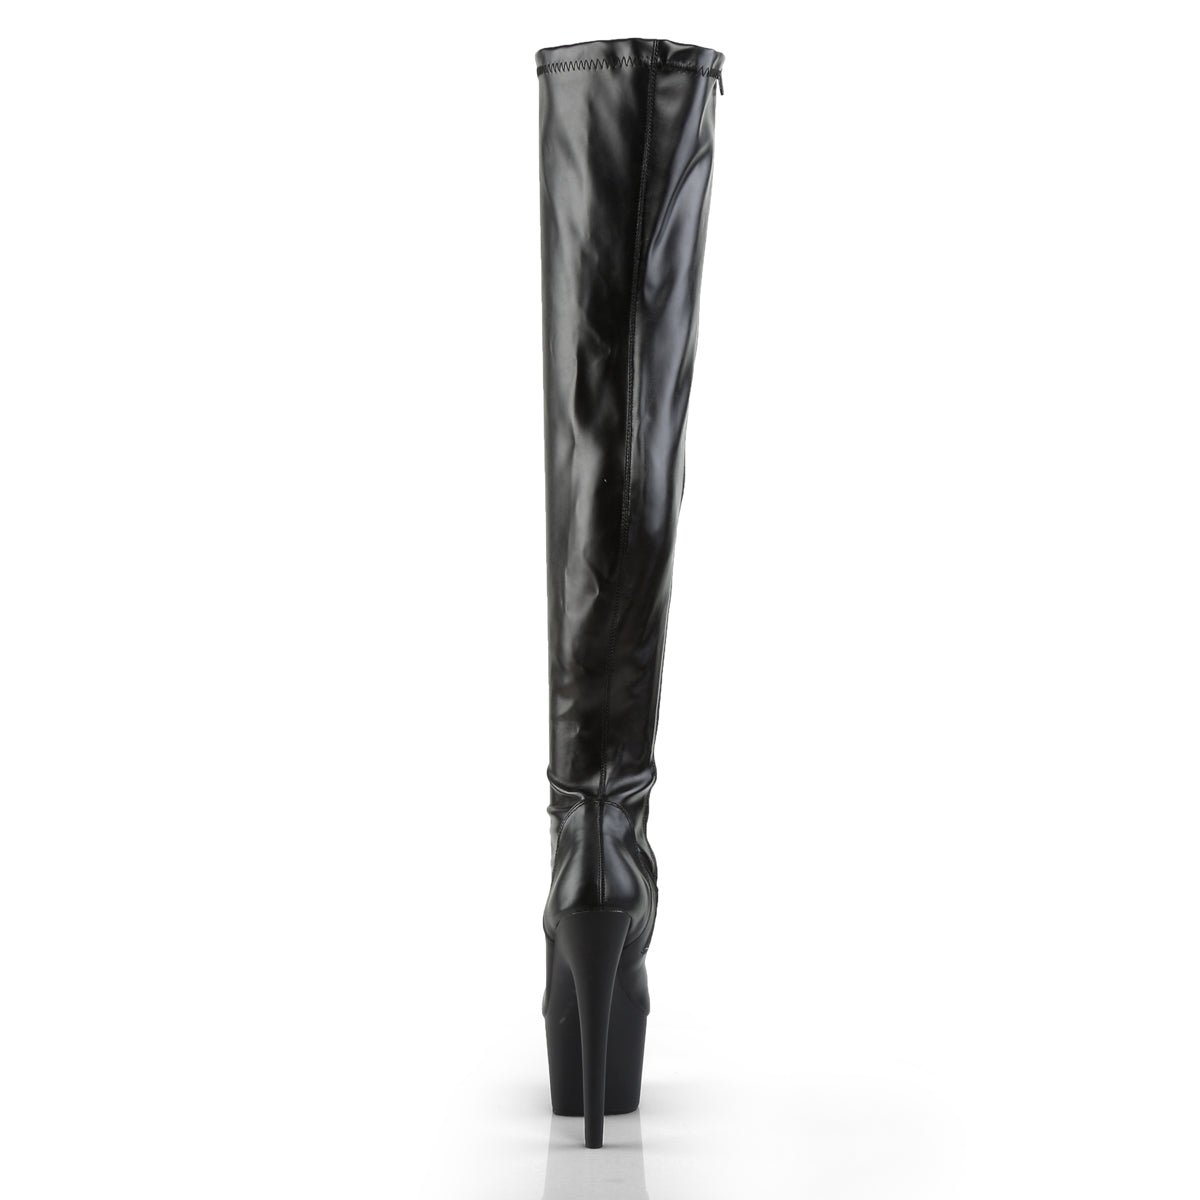 ADORE-3000/B/PU 7" PLEASER FAST DELIVERY 24-48h